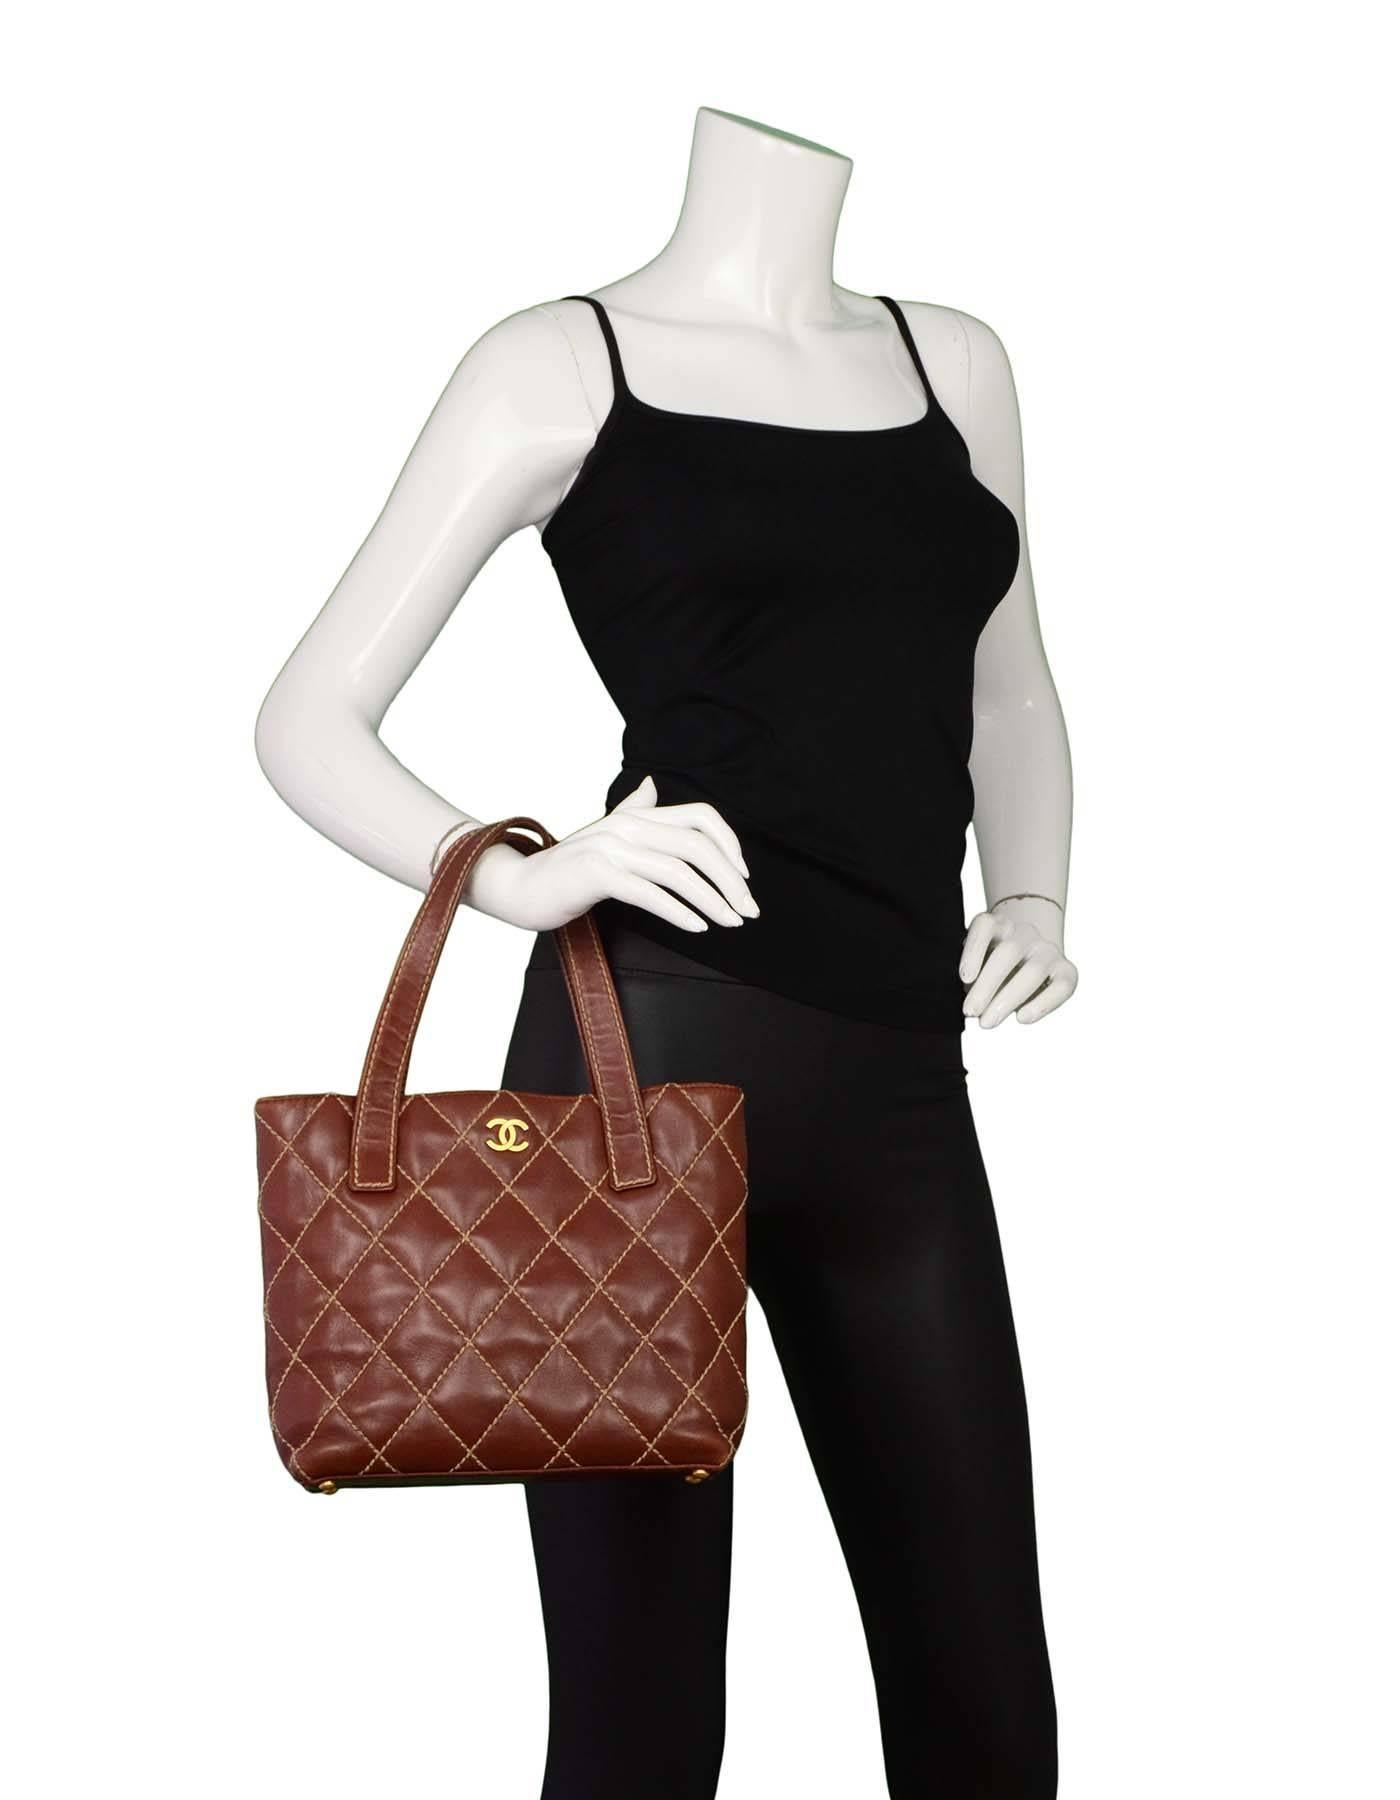 Chanel Brown Quilted Surpique Small Tote
Features CC logo at front and tan contrast stitching

Made In: France
Year of Production: 2003-2004
Color: Brown
Hardware: Goldtone
Materials: Leather
Lining: Brown logo textile
Closure/Opening: